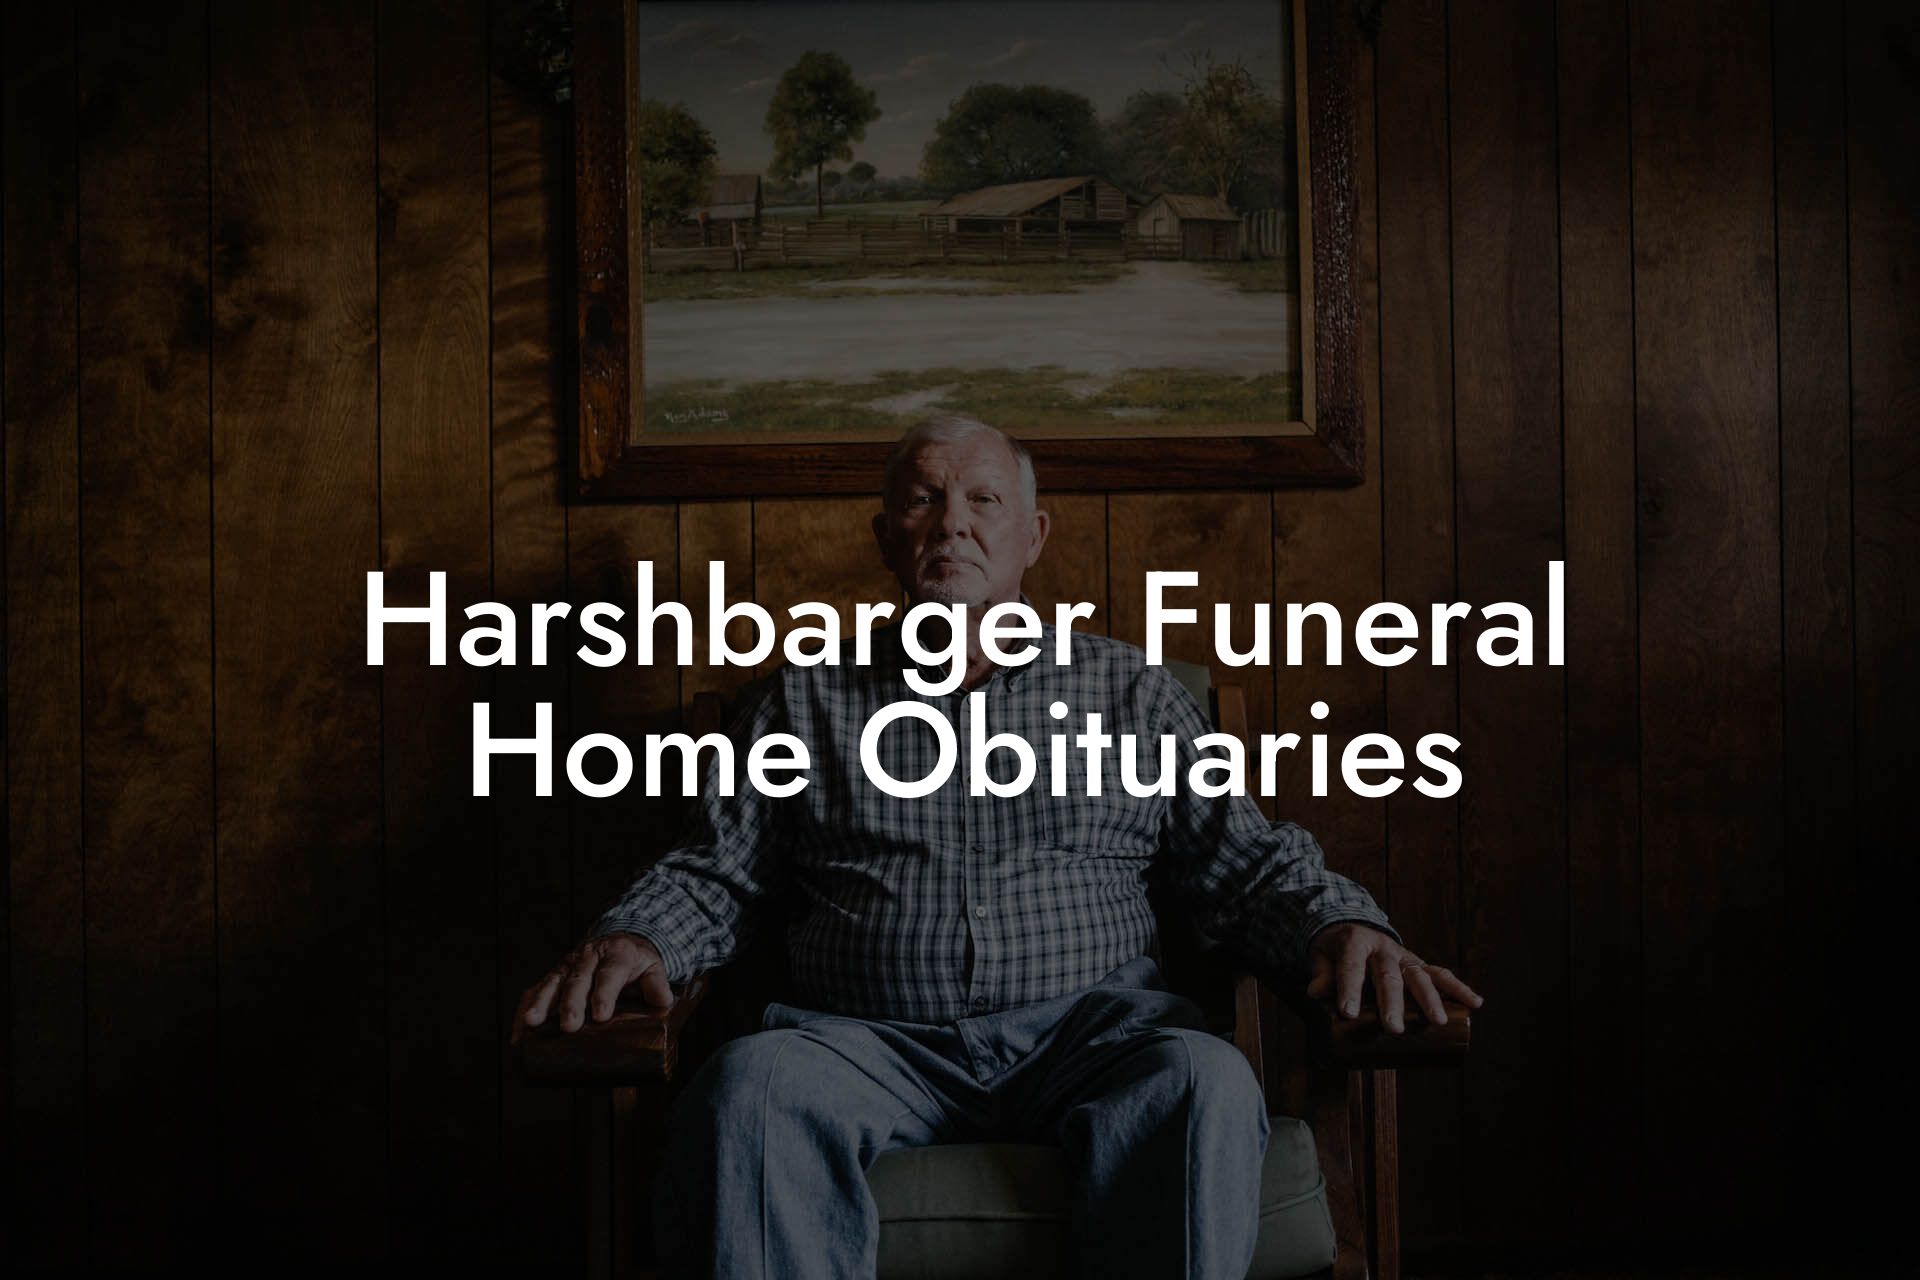 Harshbarger Funeral Home Obituaries